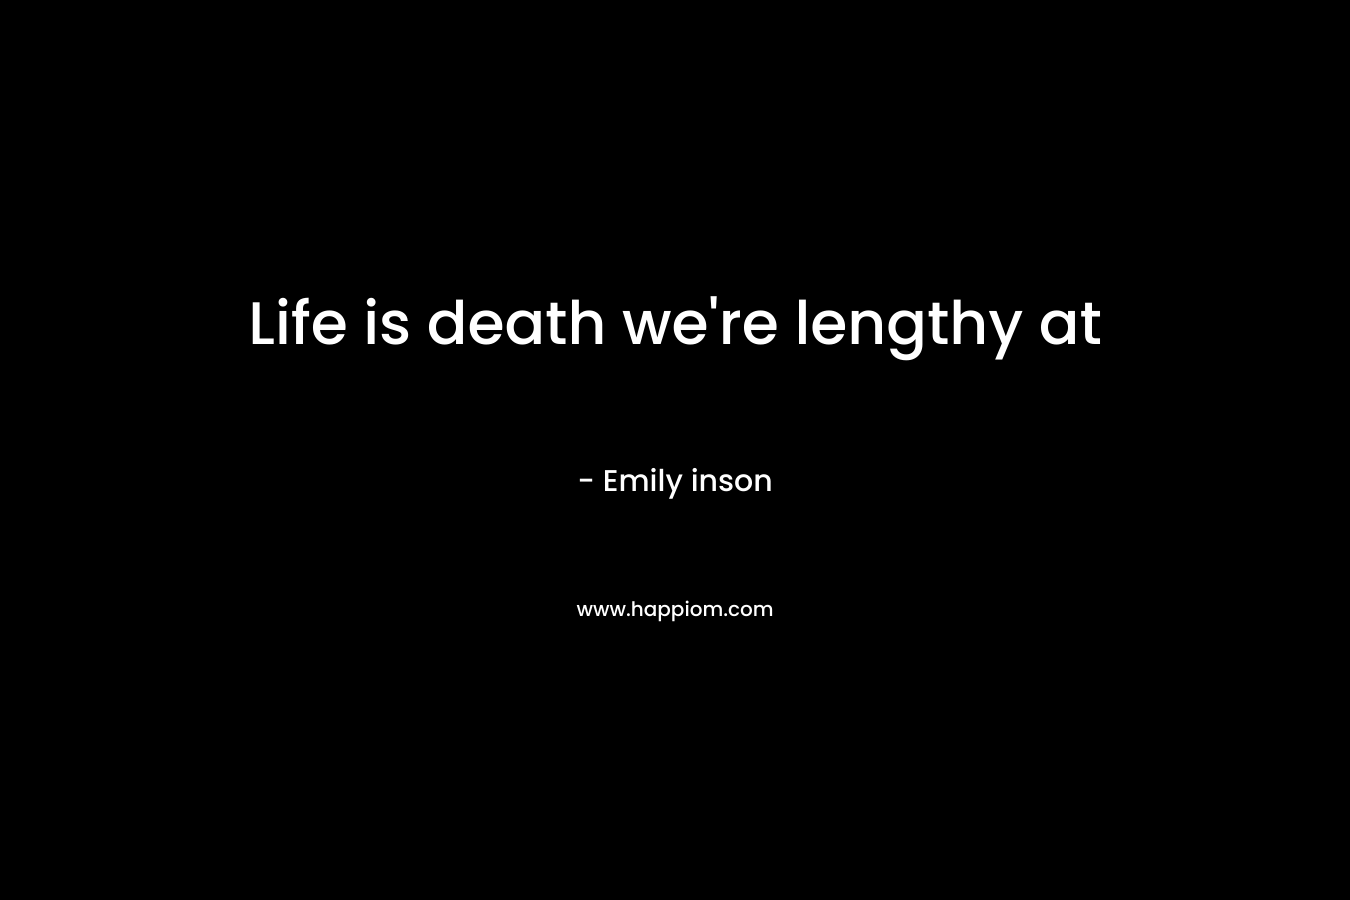 Life is death we’re lengthy at – Emily inson